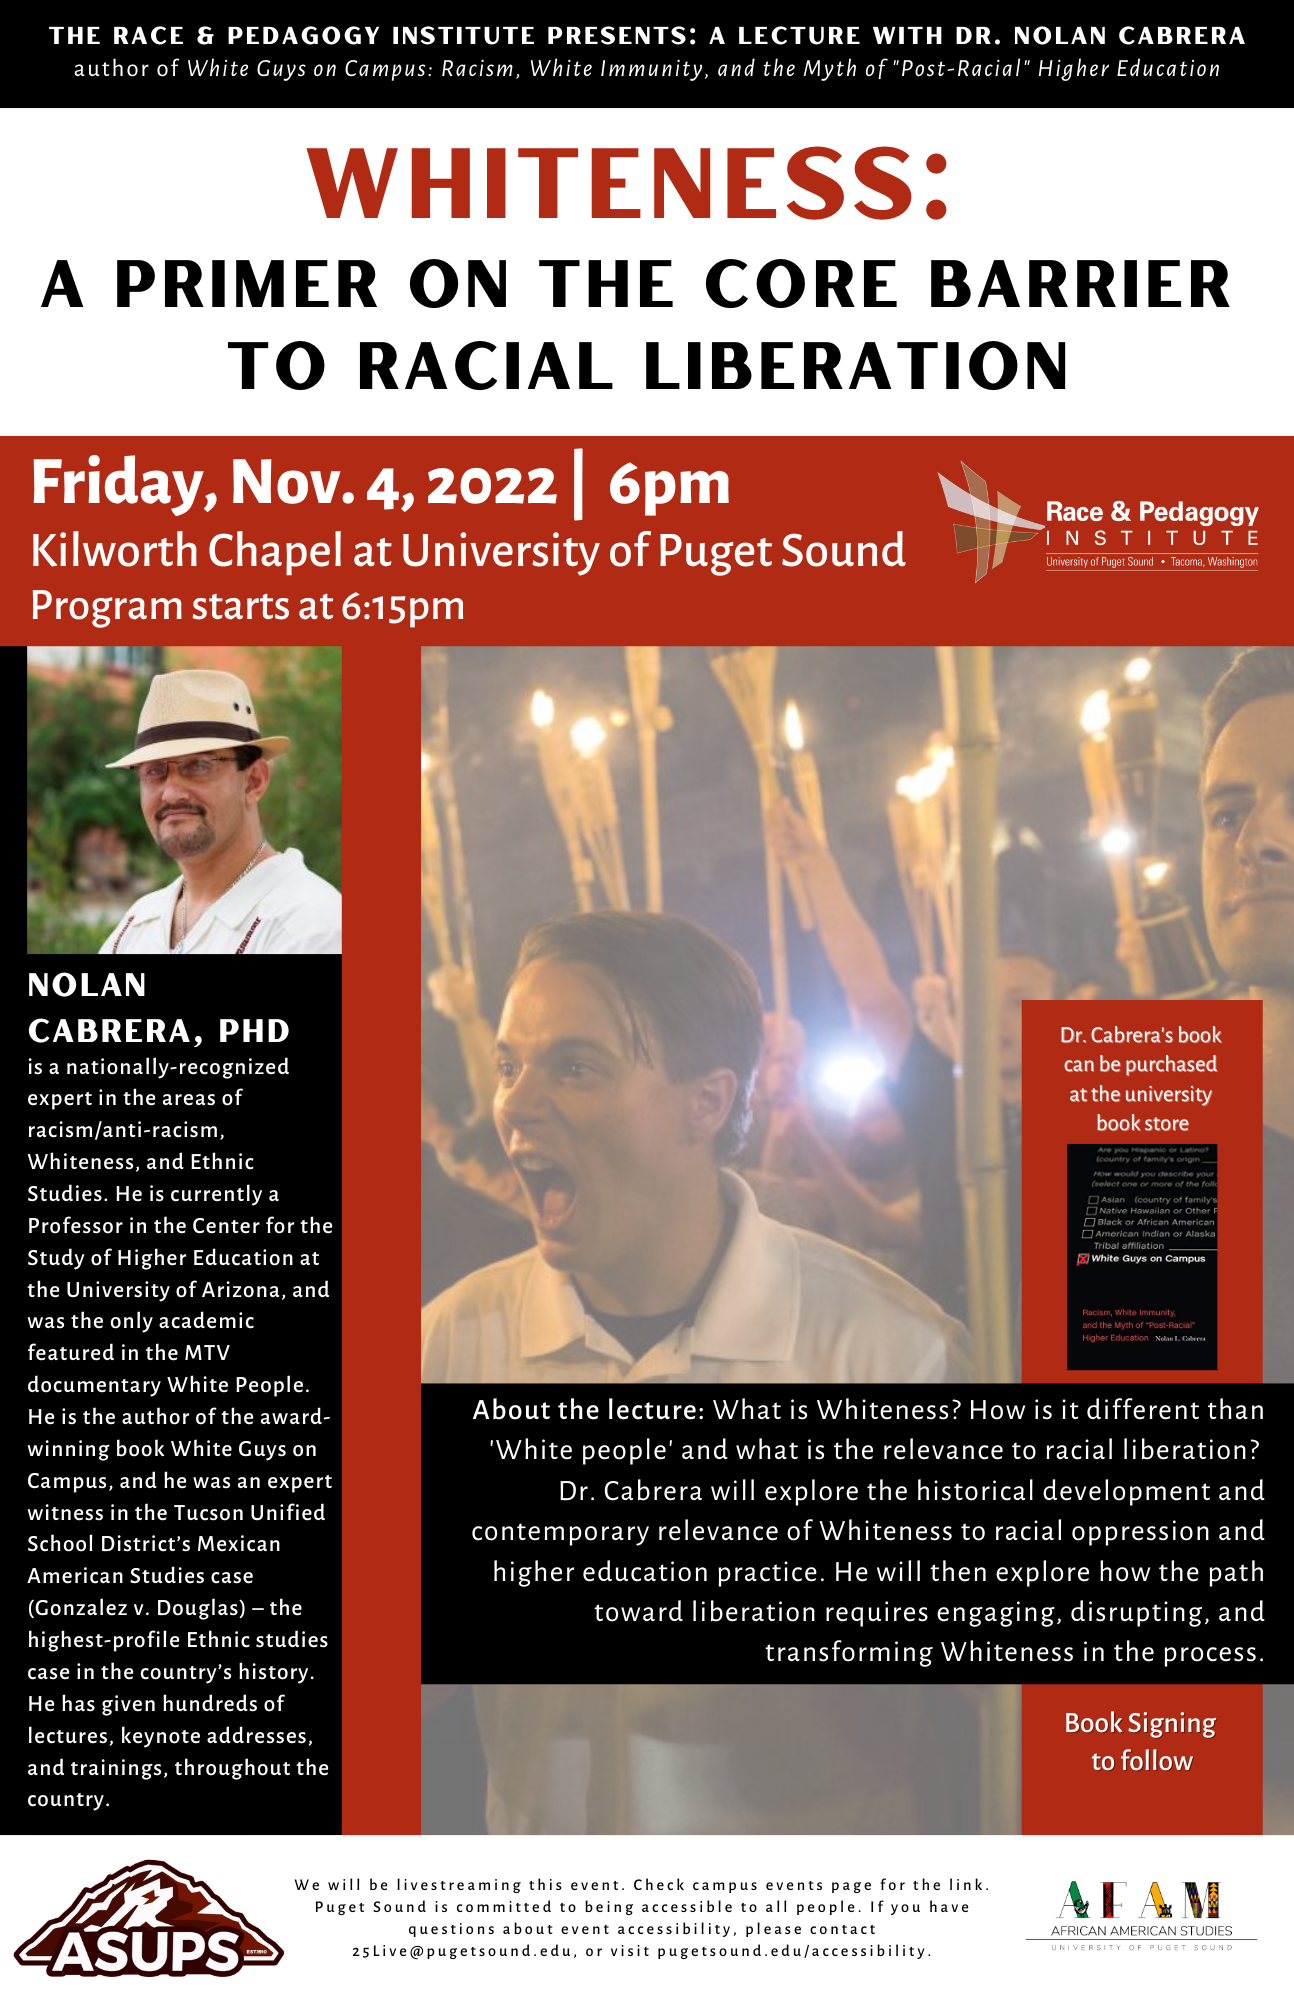 Poster image in colors red, white, and black, displaying the name of the event, a brief description of the event, and a bio of Nolan Cabrera. All of the writing on the poster is also written on this webpage.